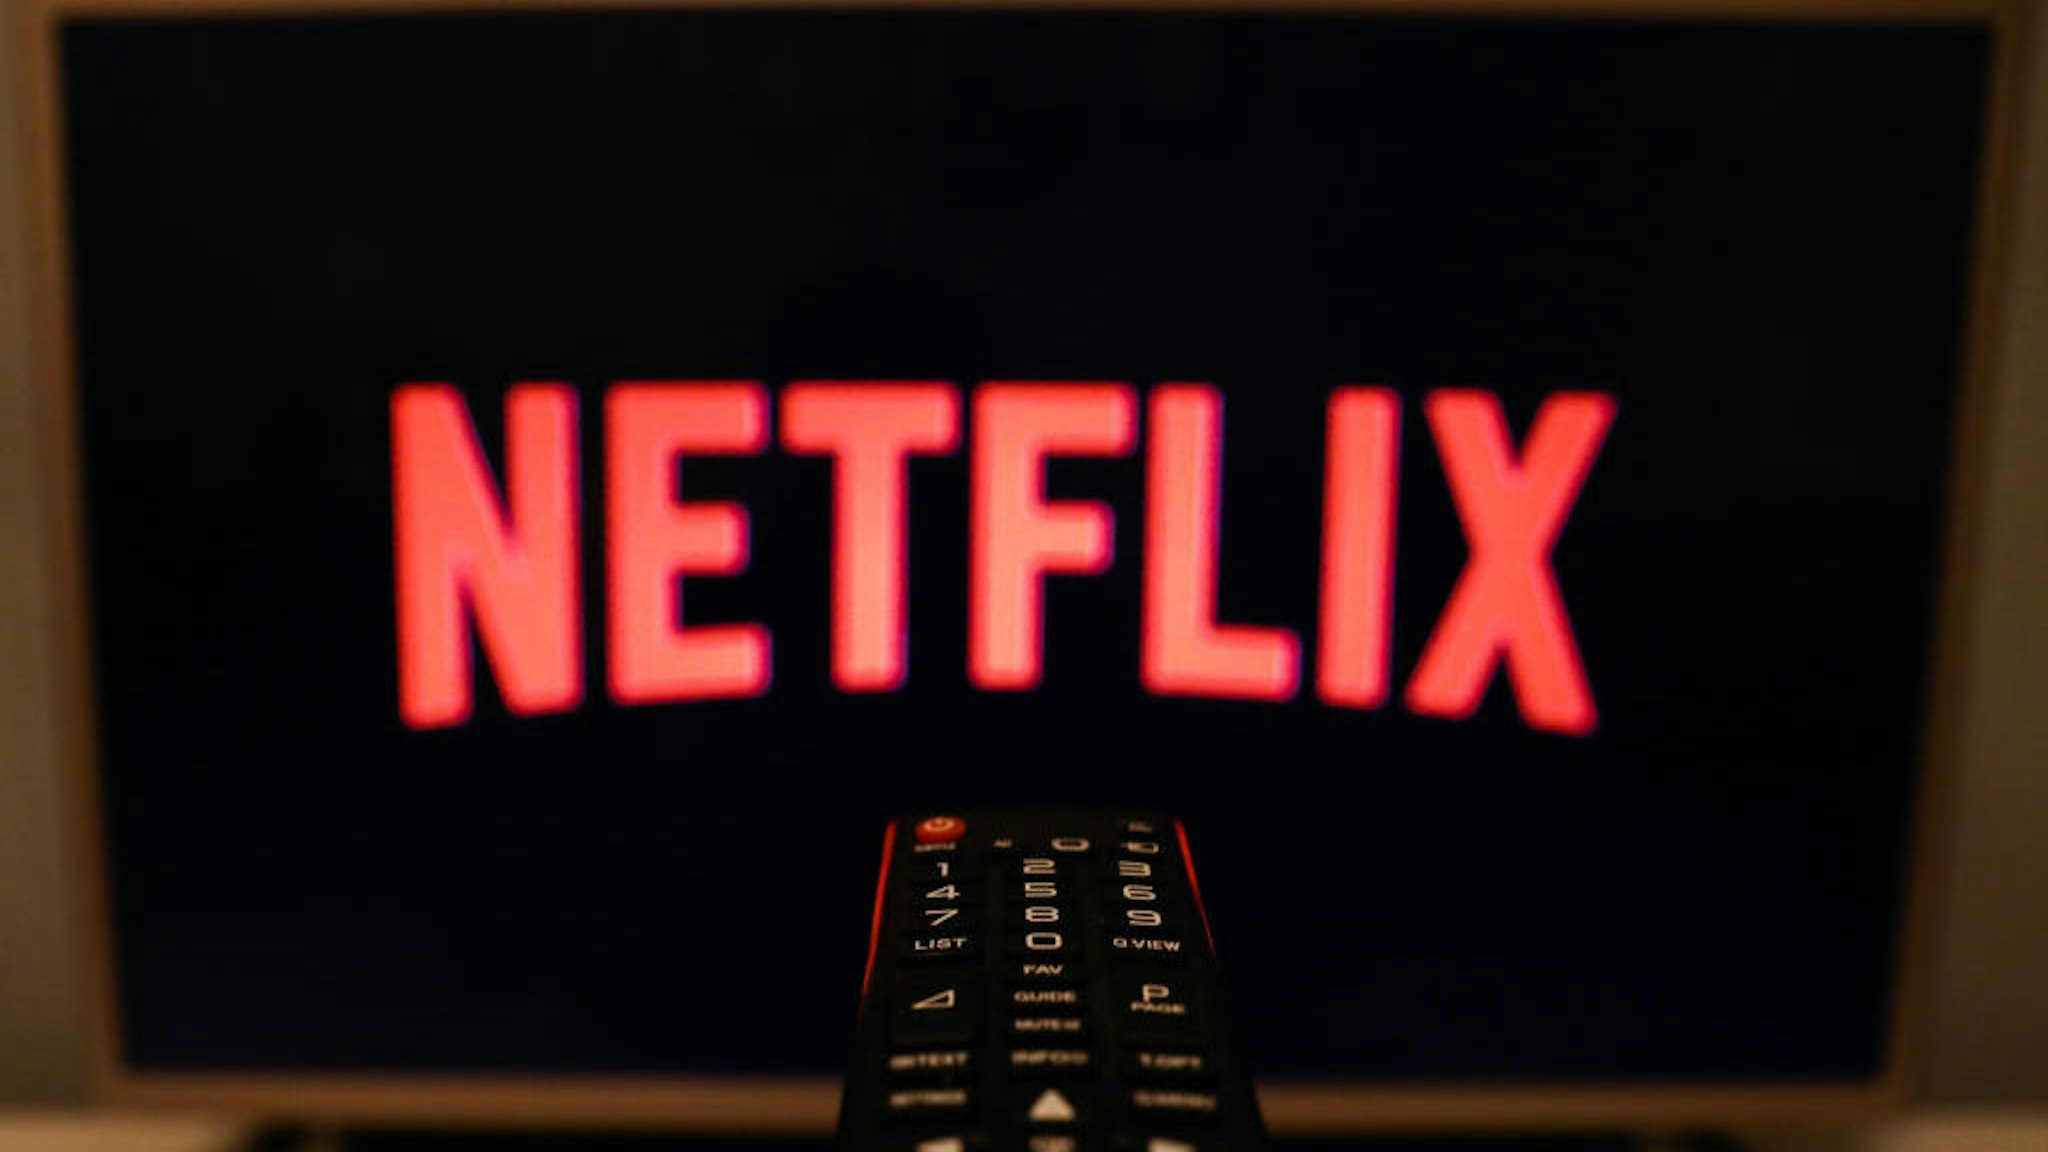 Netflix logo is seen displayed on TV screen in this illustration photo taken in Poland on July 16, 2020. On-Demand streaming services gained popularity and new subscribers during the coronavirus pandemic. (Photo Illustration by Jakub Porzycki/NurPhoto via Getty Images)